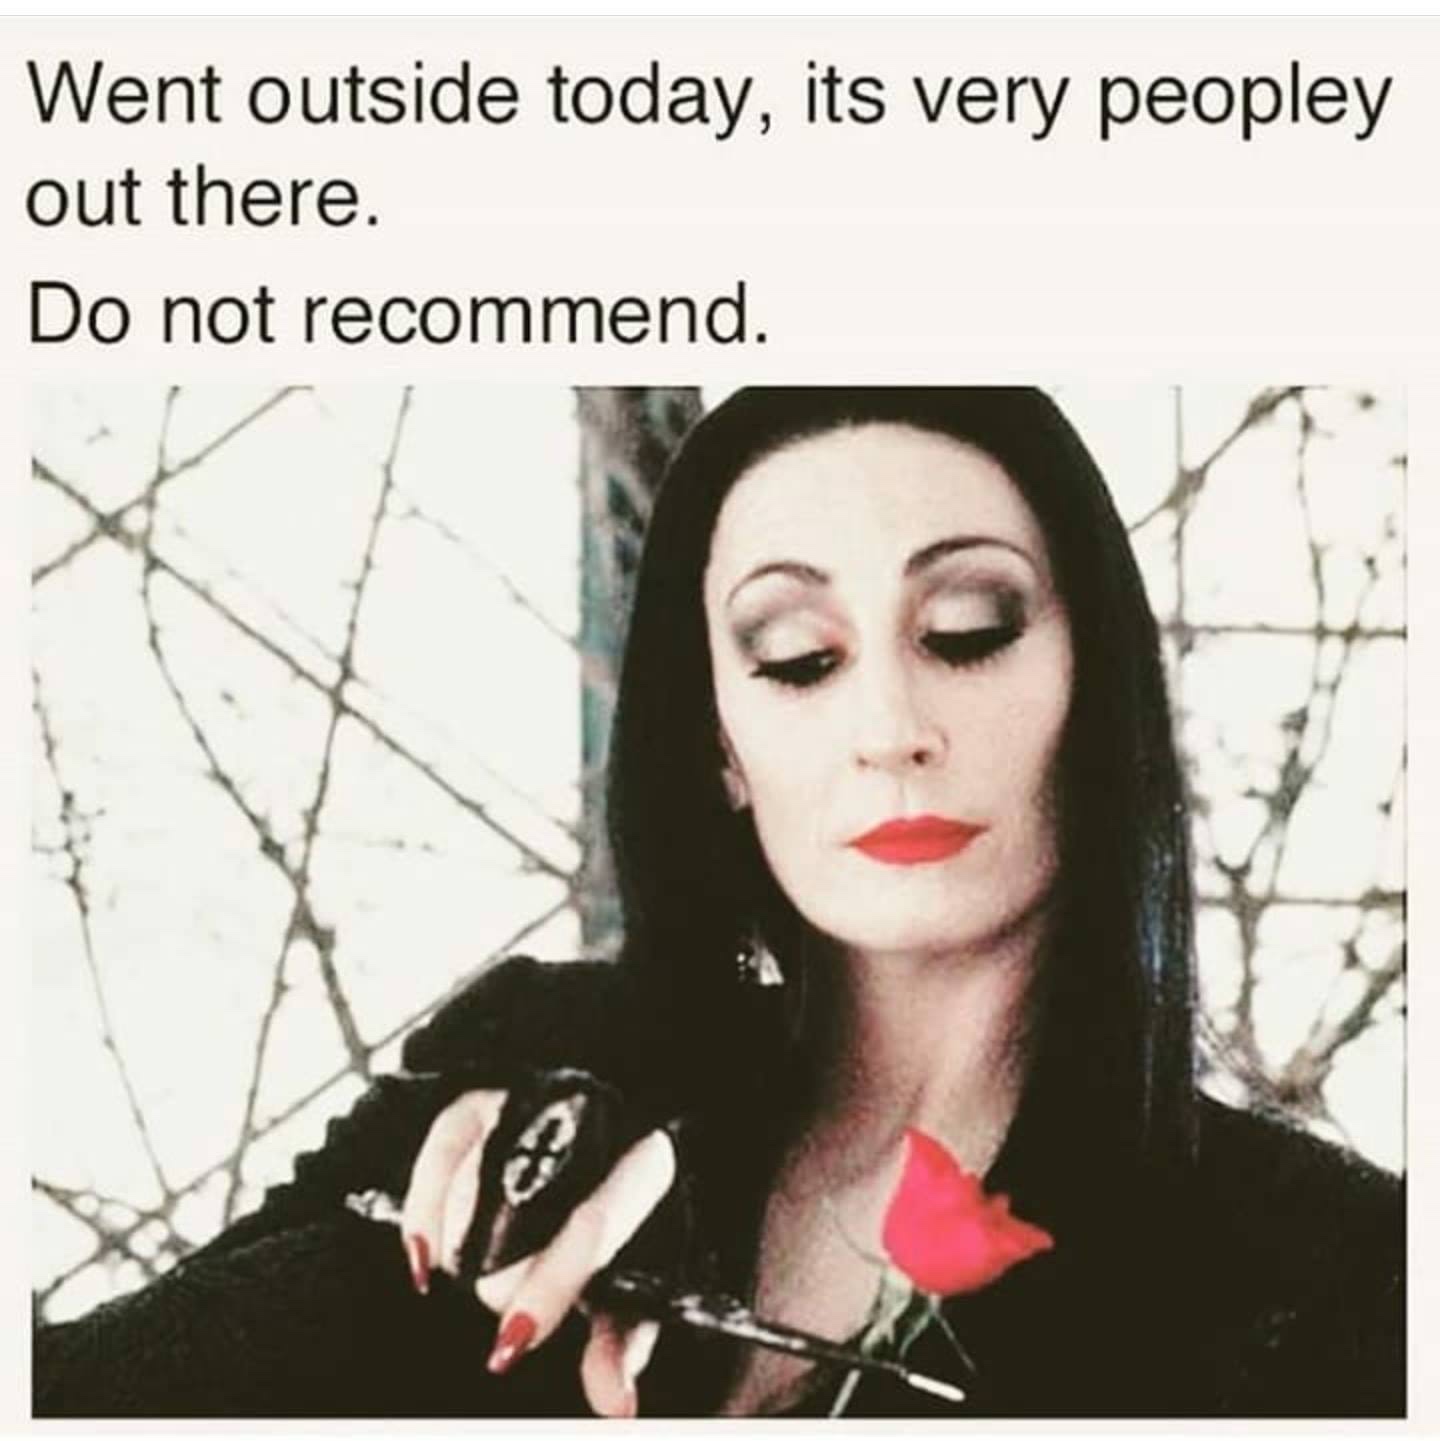 morticia addams happy birthday - Went outside today, its very peopley out there. Do not recommend.